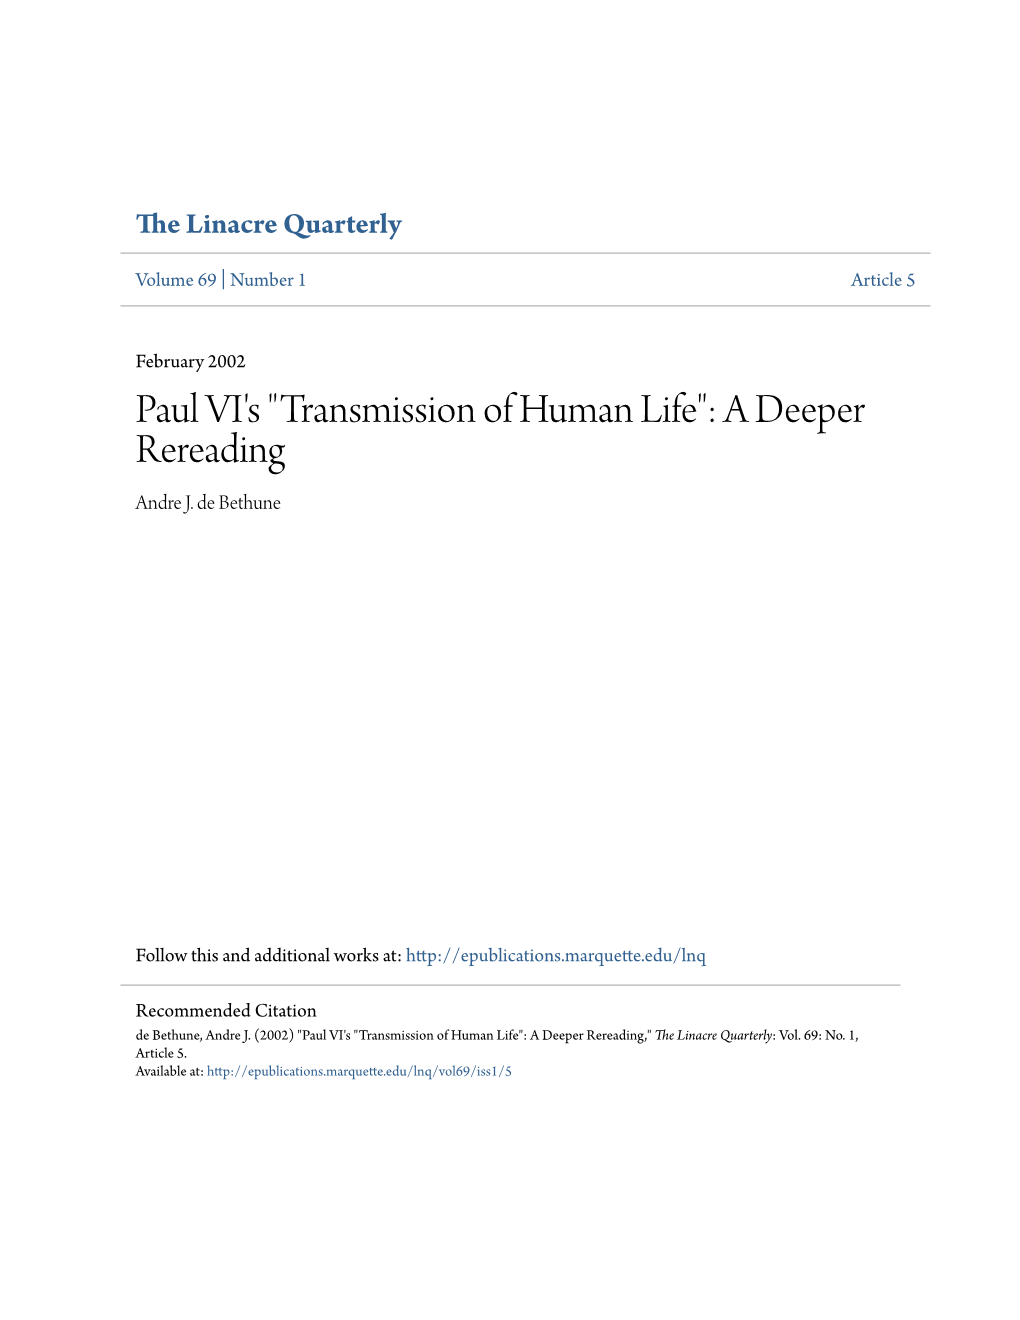 Transmission of Human Life": a Deeper Rereading Andre J